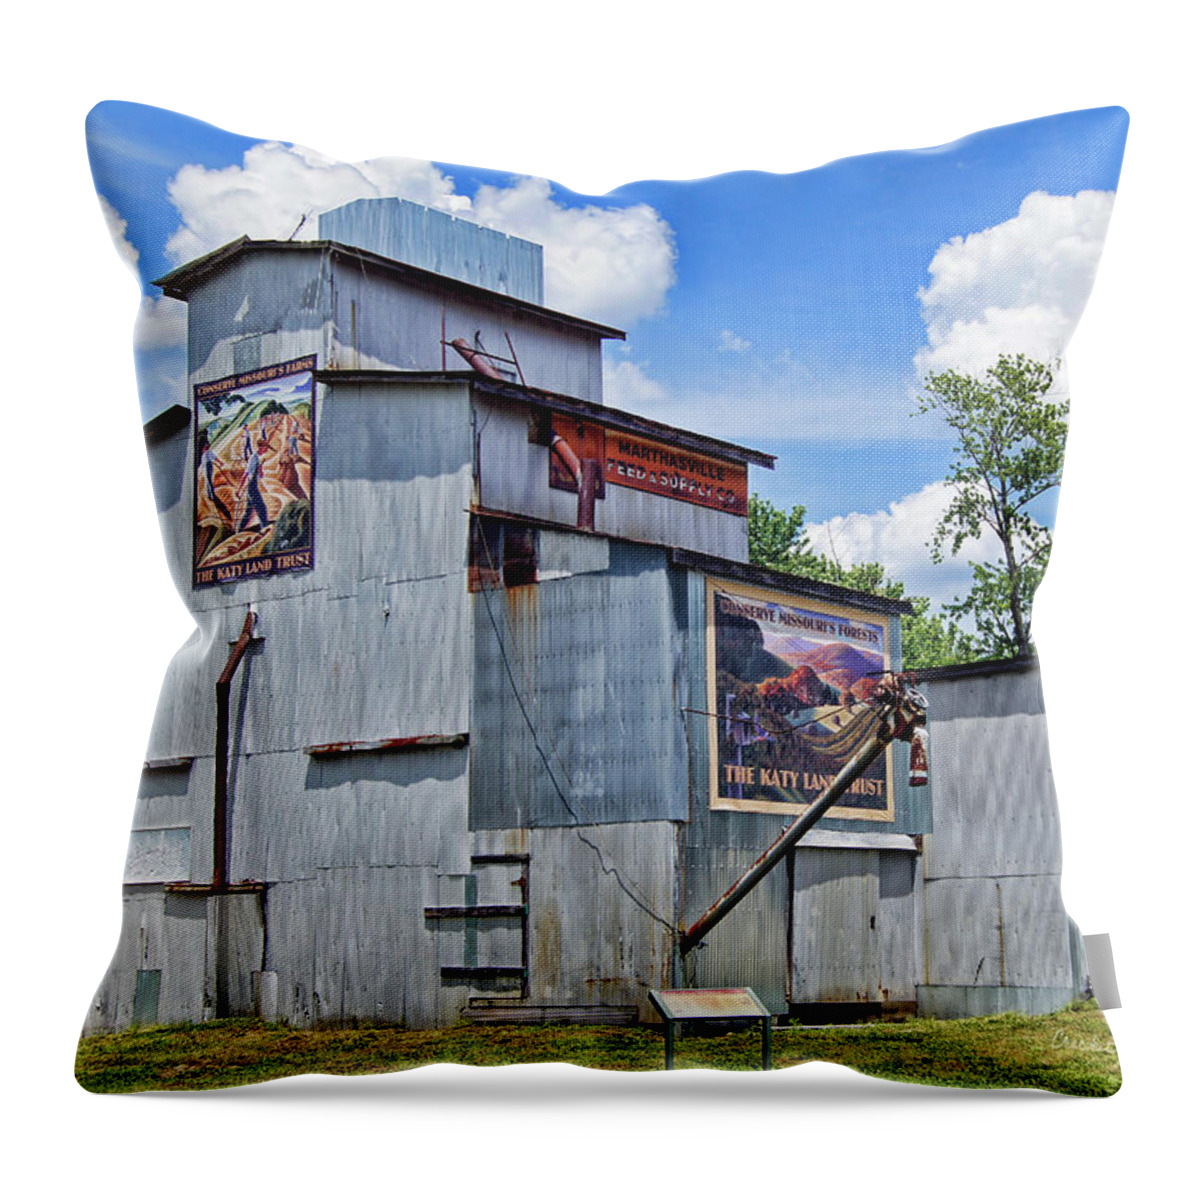 Elevator Throw Pillow featuring the photograph Katy Land Trust Murals at Treloar by Cricket Hackmann